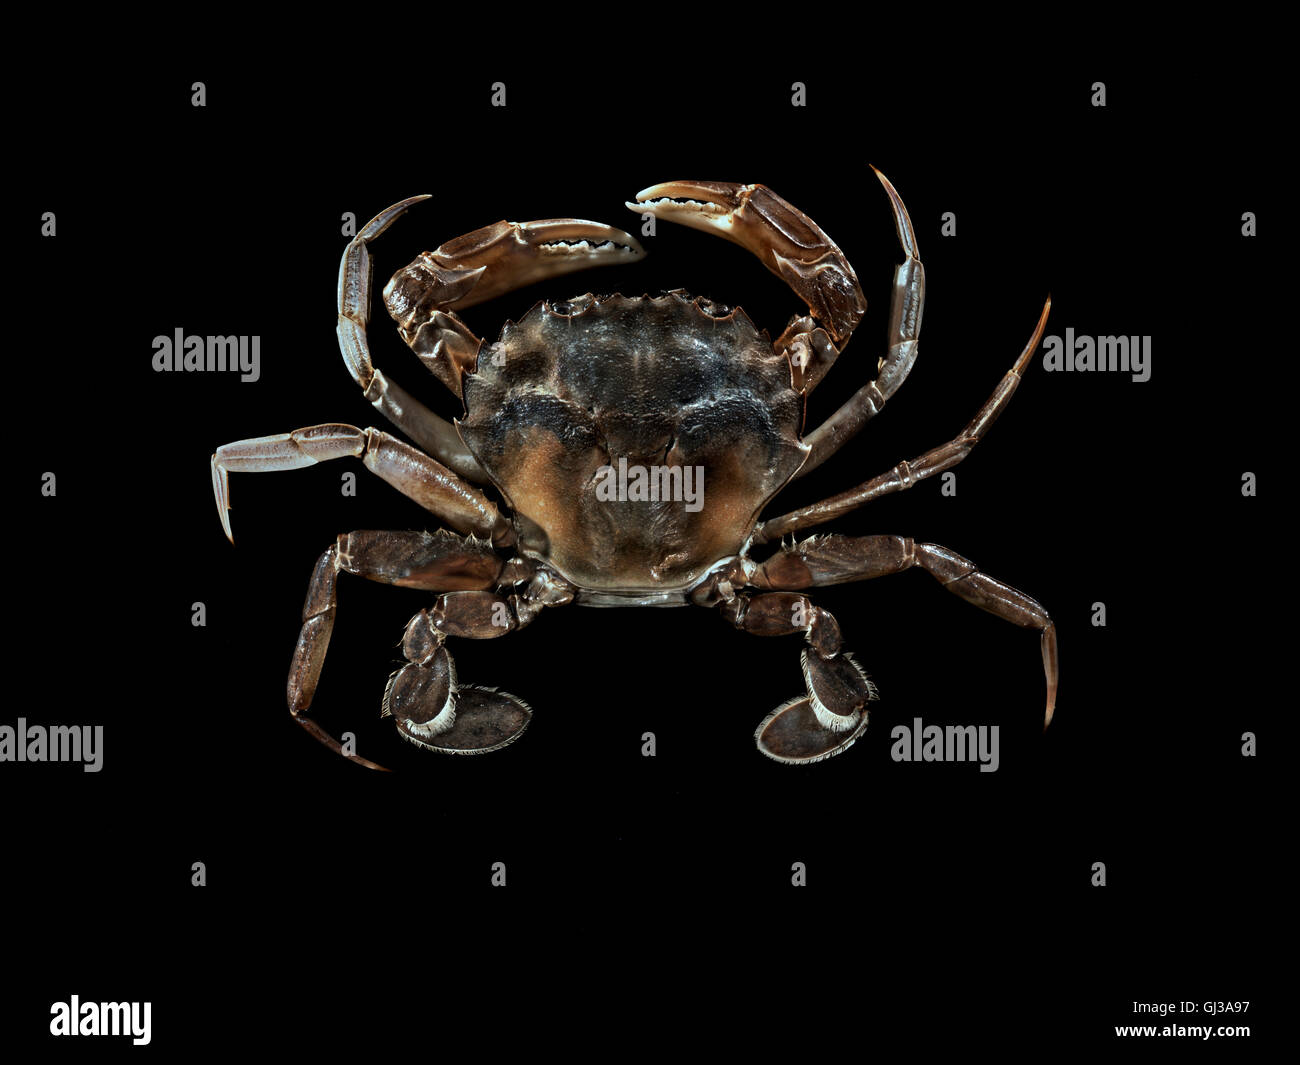 Top view of crab against black background Stock Photo